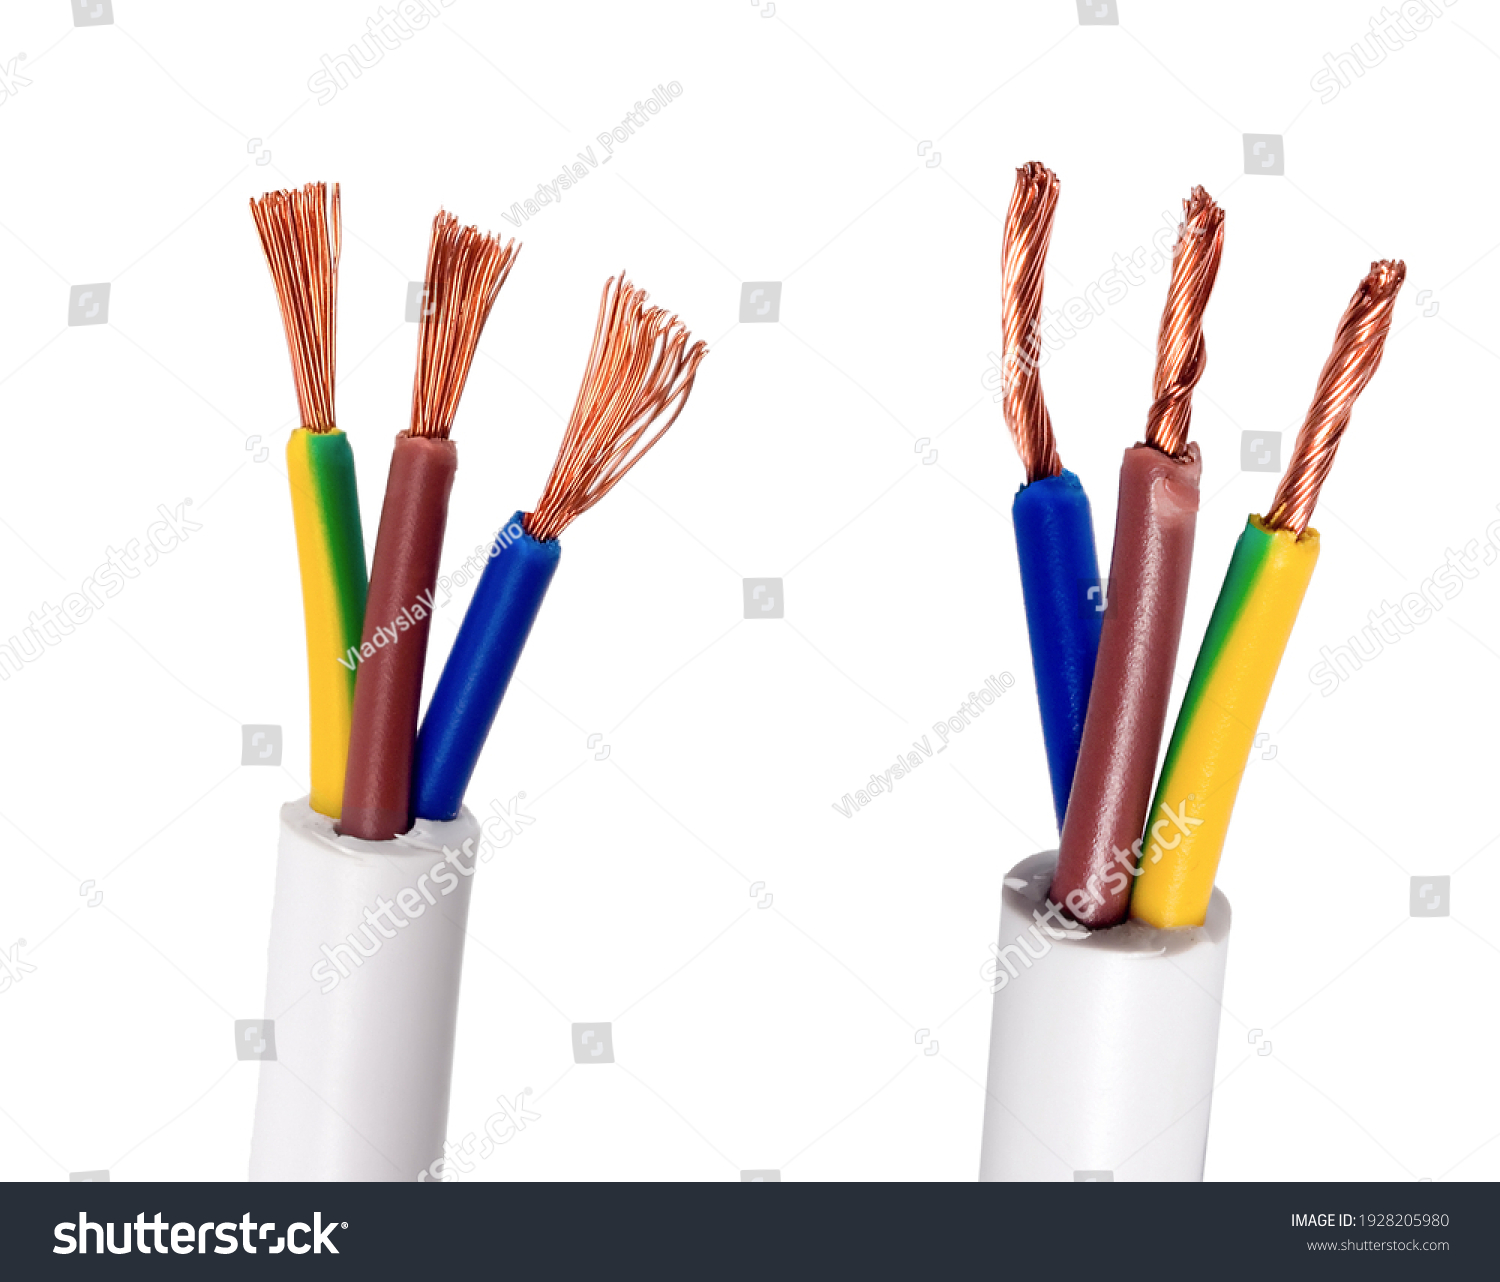 Cable Electrical power wire copper isolated on white background. Electric cable multi-colored installation #1928205980